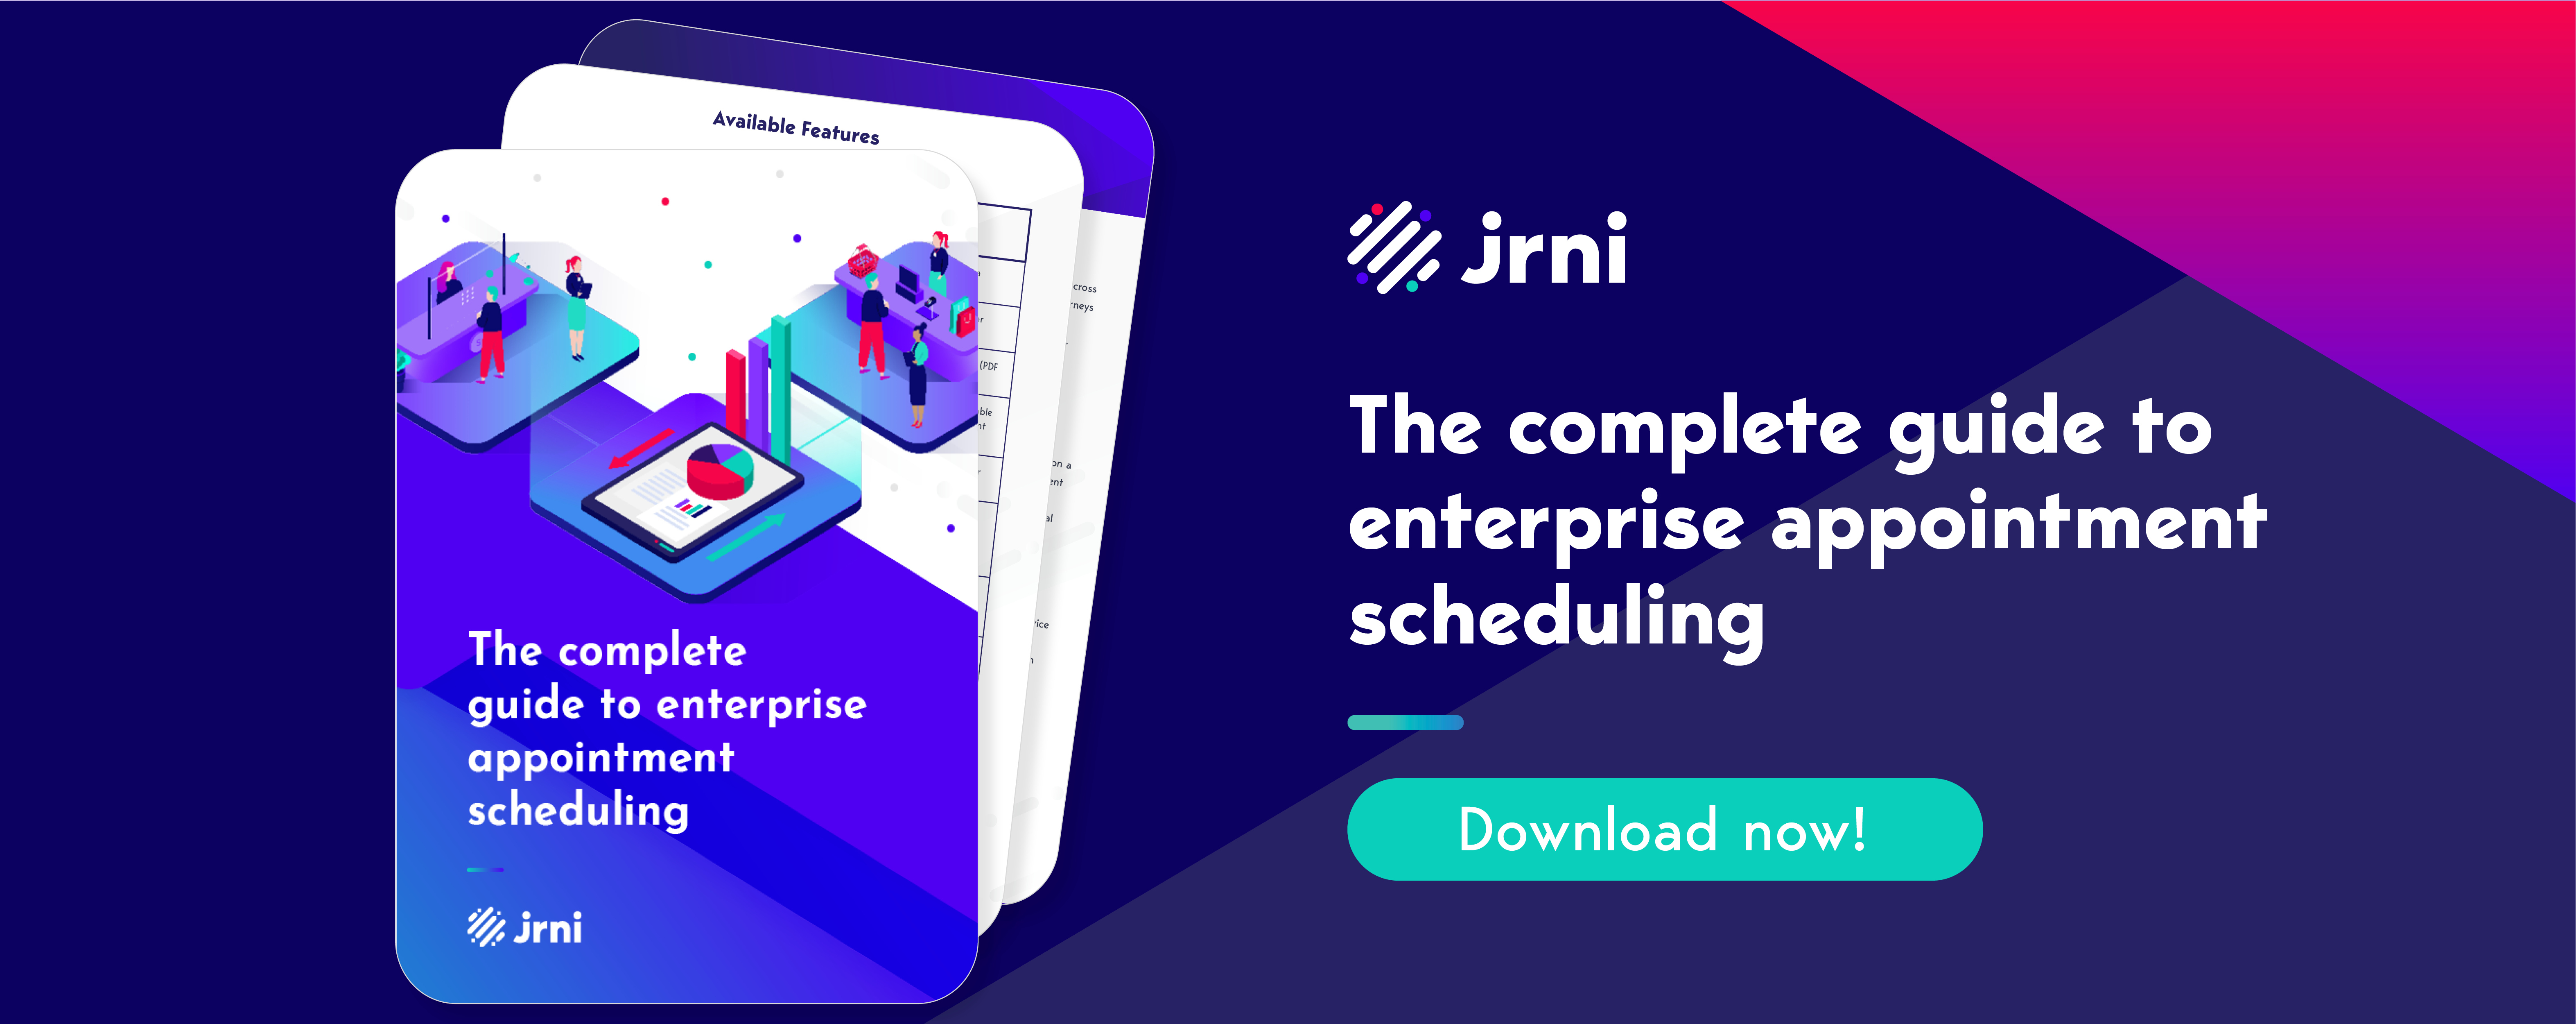 The complete guide to enterprise appointment scheduling: Download the guide now!